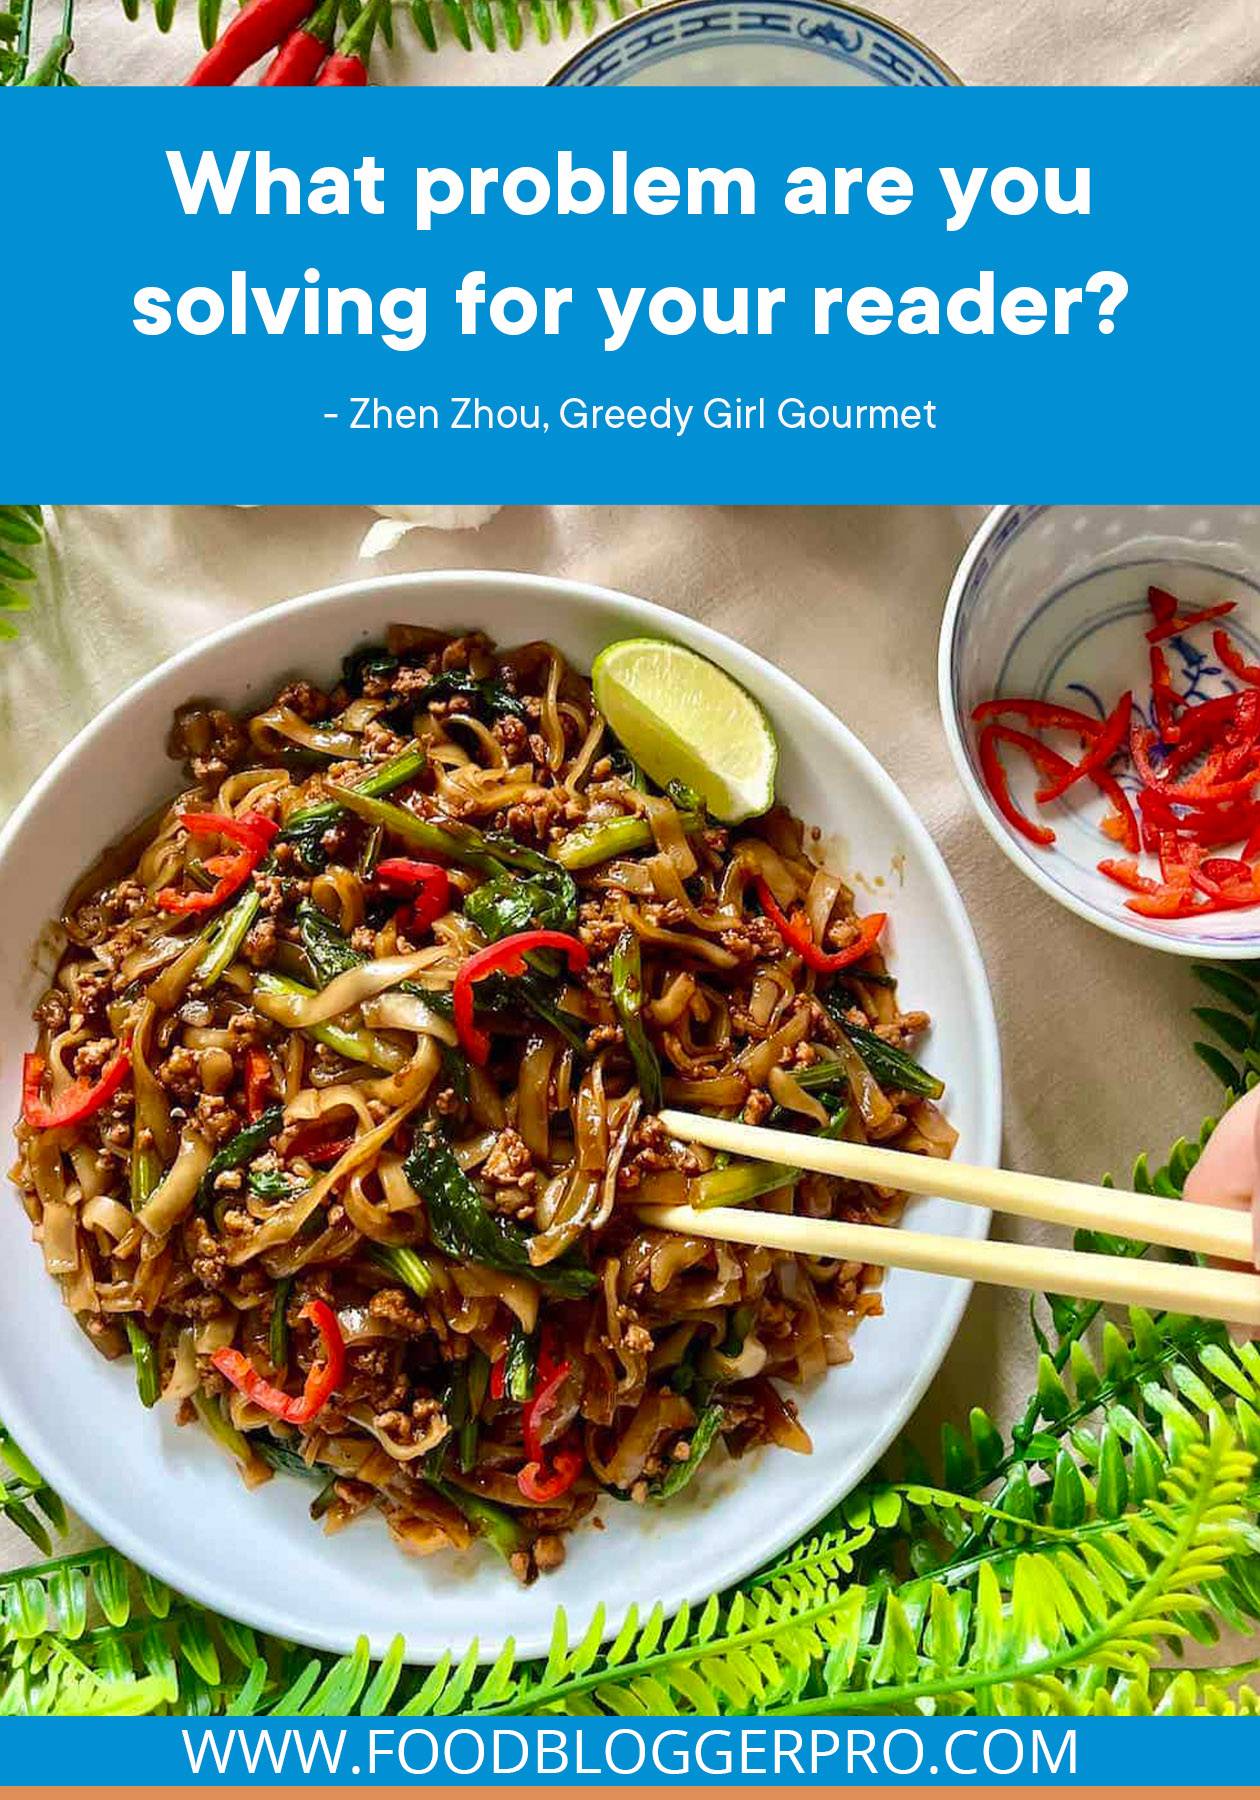 A photograph of a veggie noodle dish in a bowl with chopsticks and a quote from Zhen Zhou's episode of The Food Blogger Pro Podcast that reads, "What problem are you solving for your reader?"